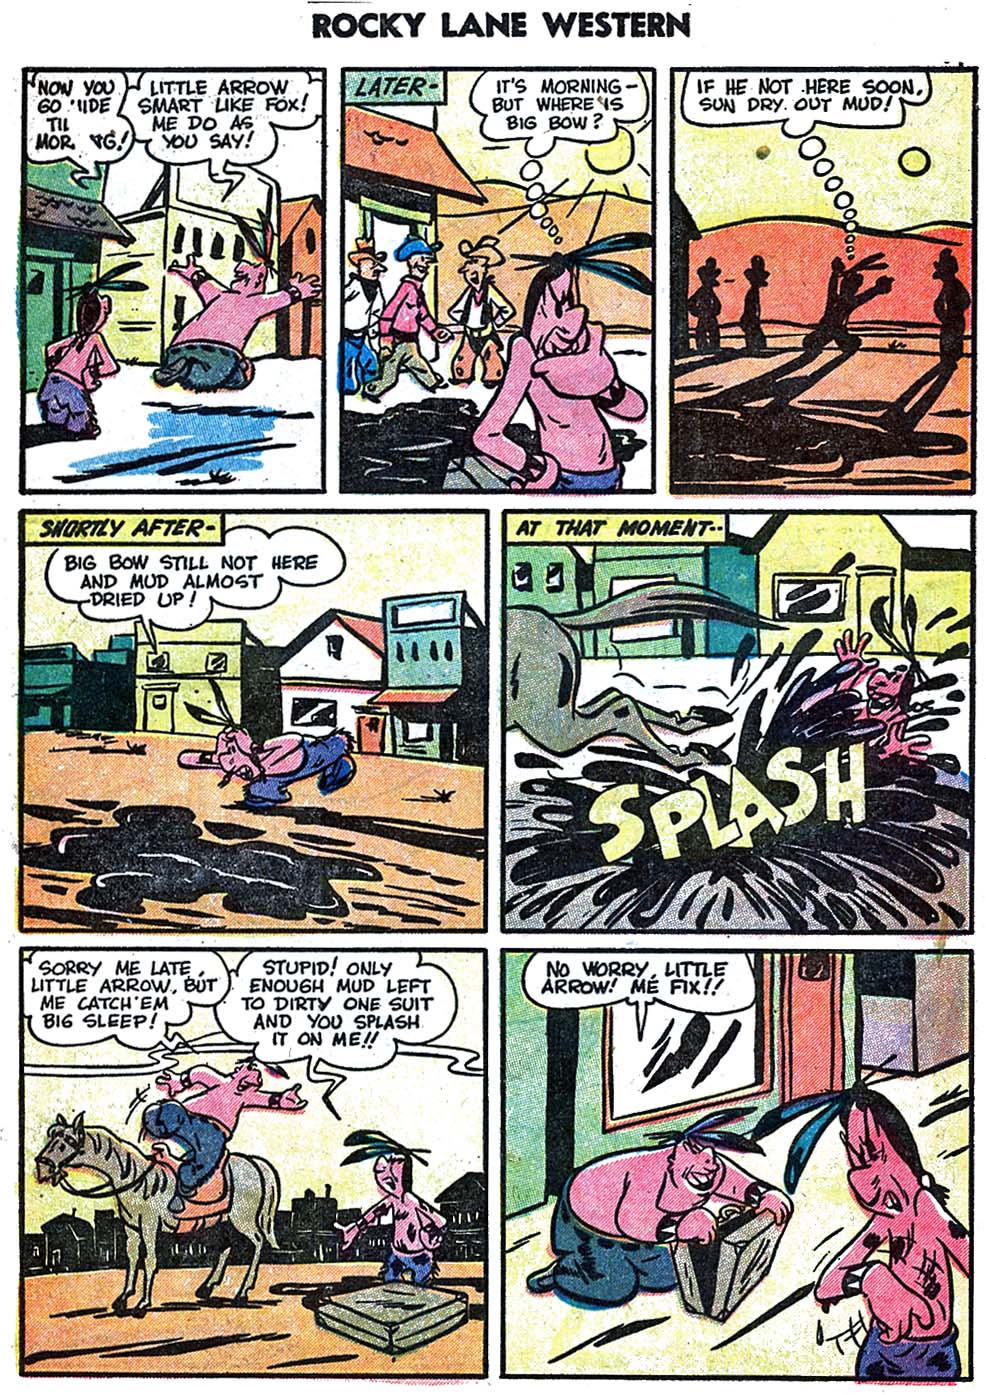 Rocky Lane Western (1954) issue 60 - Page 20